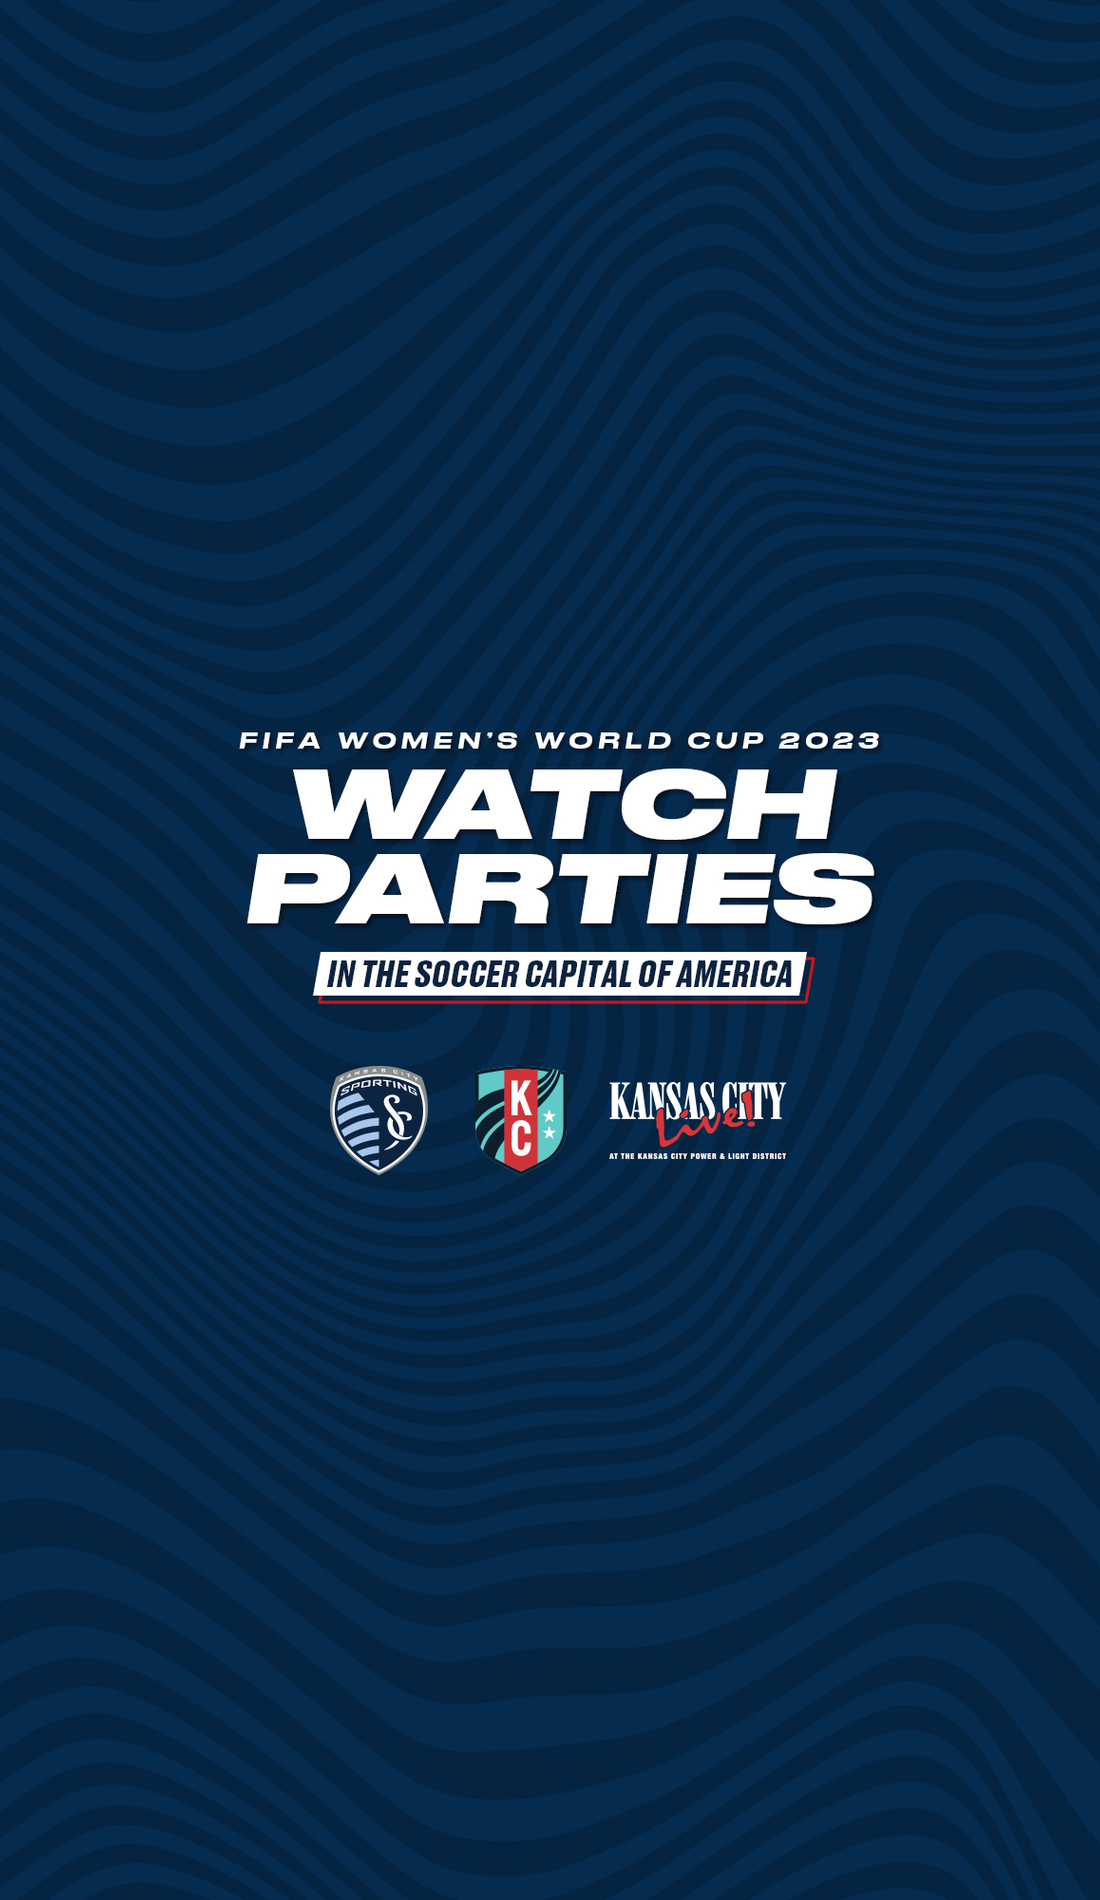 A World Cup Watch Party live event